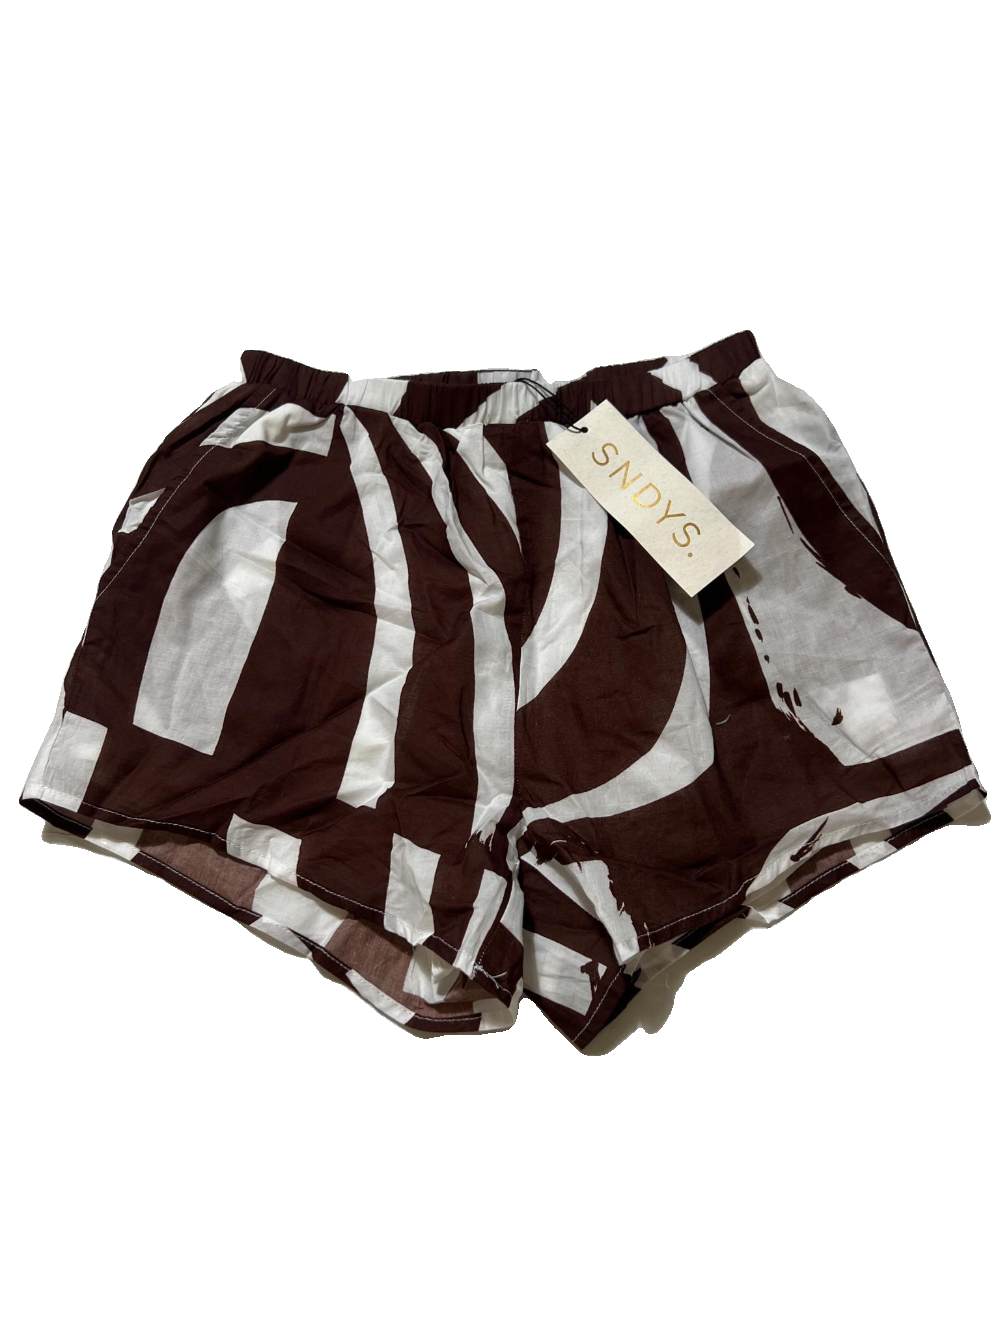 SNDYS- Brown Swirl Linen Shorts NEW WITH TAGS!